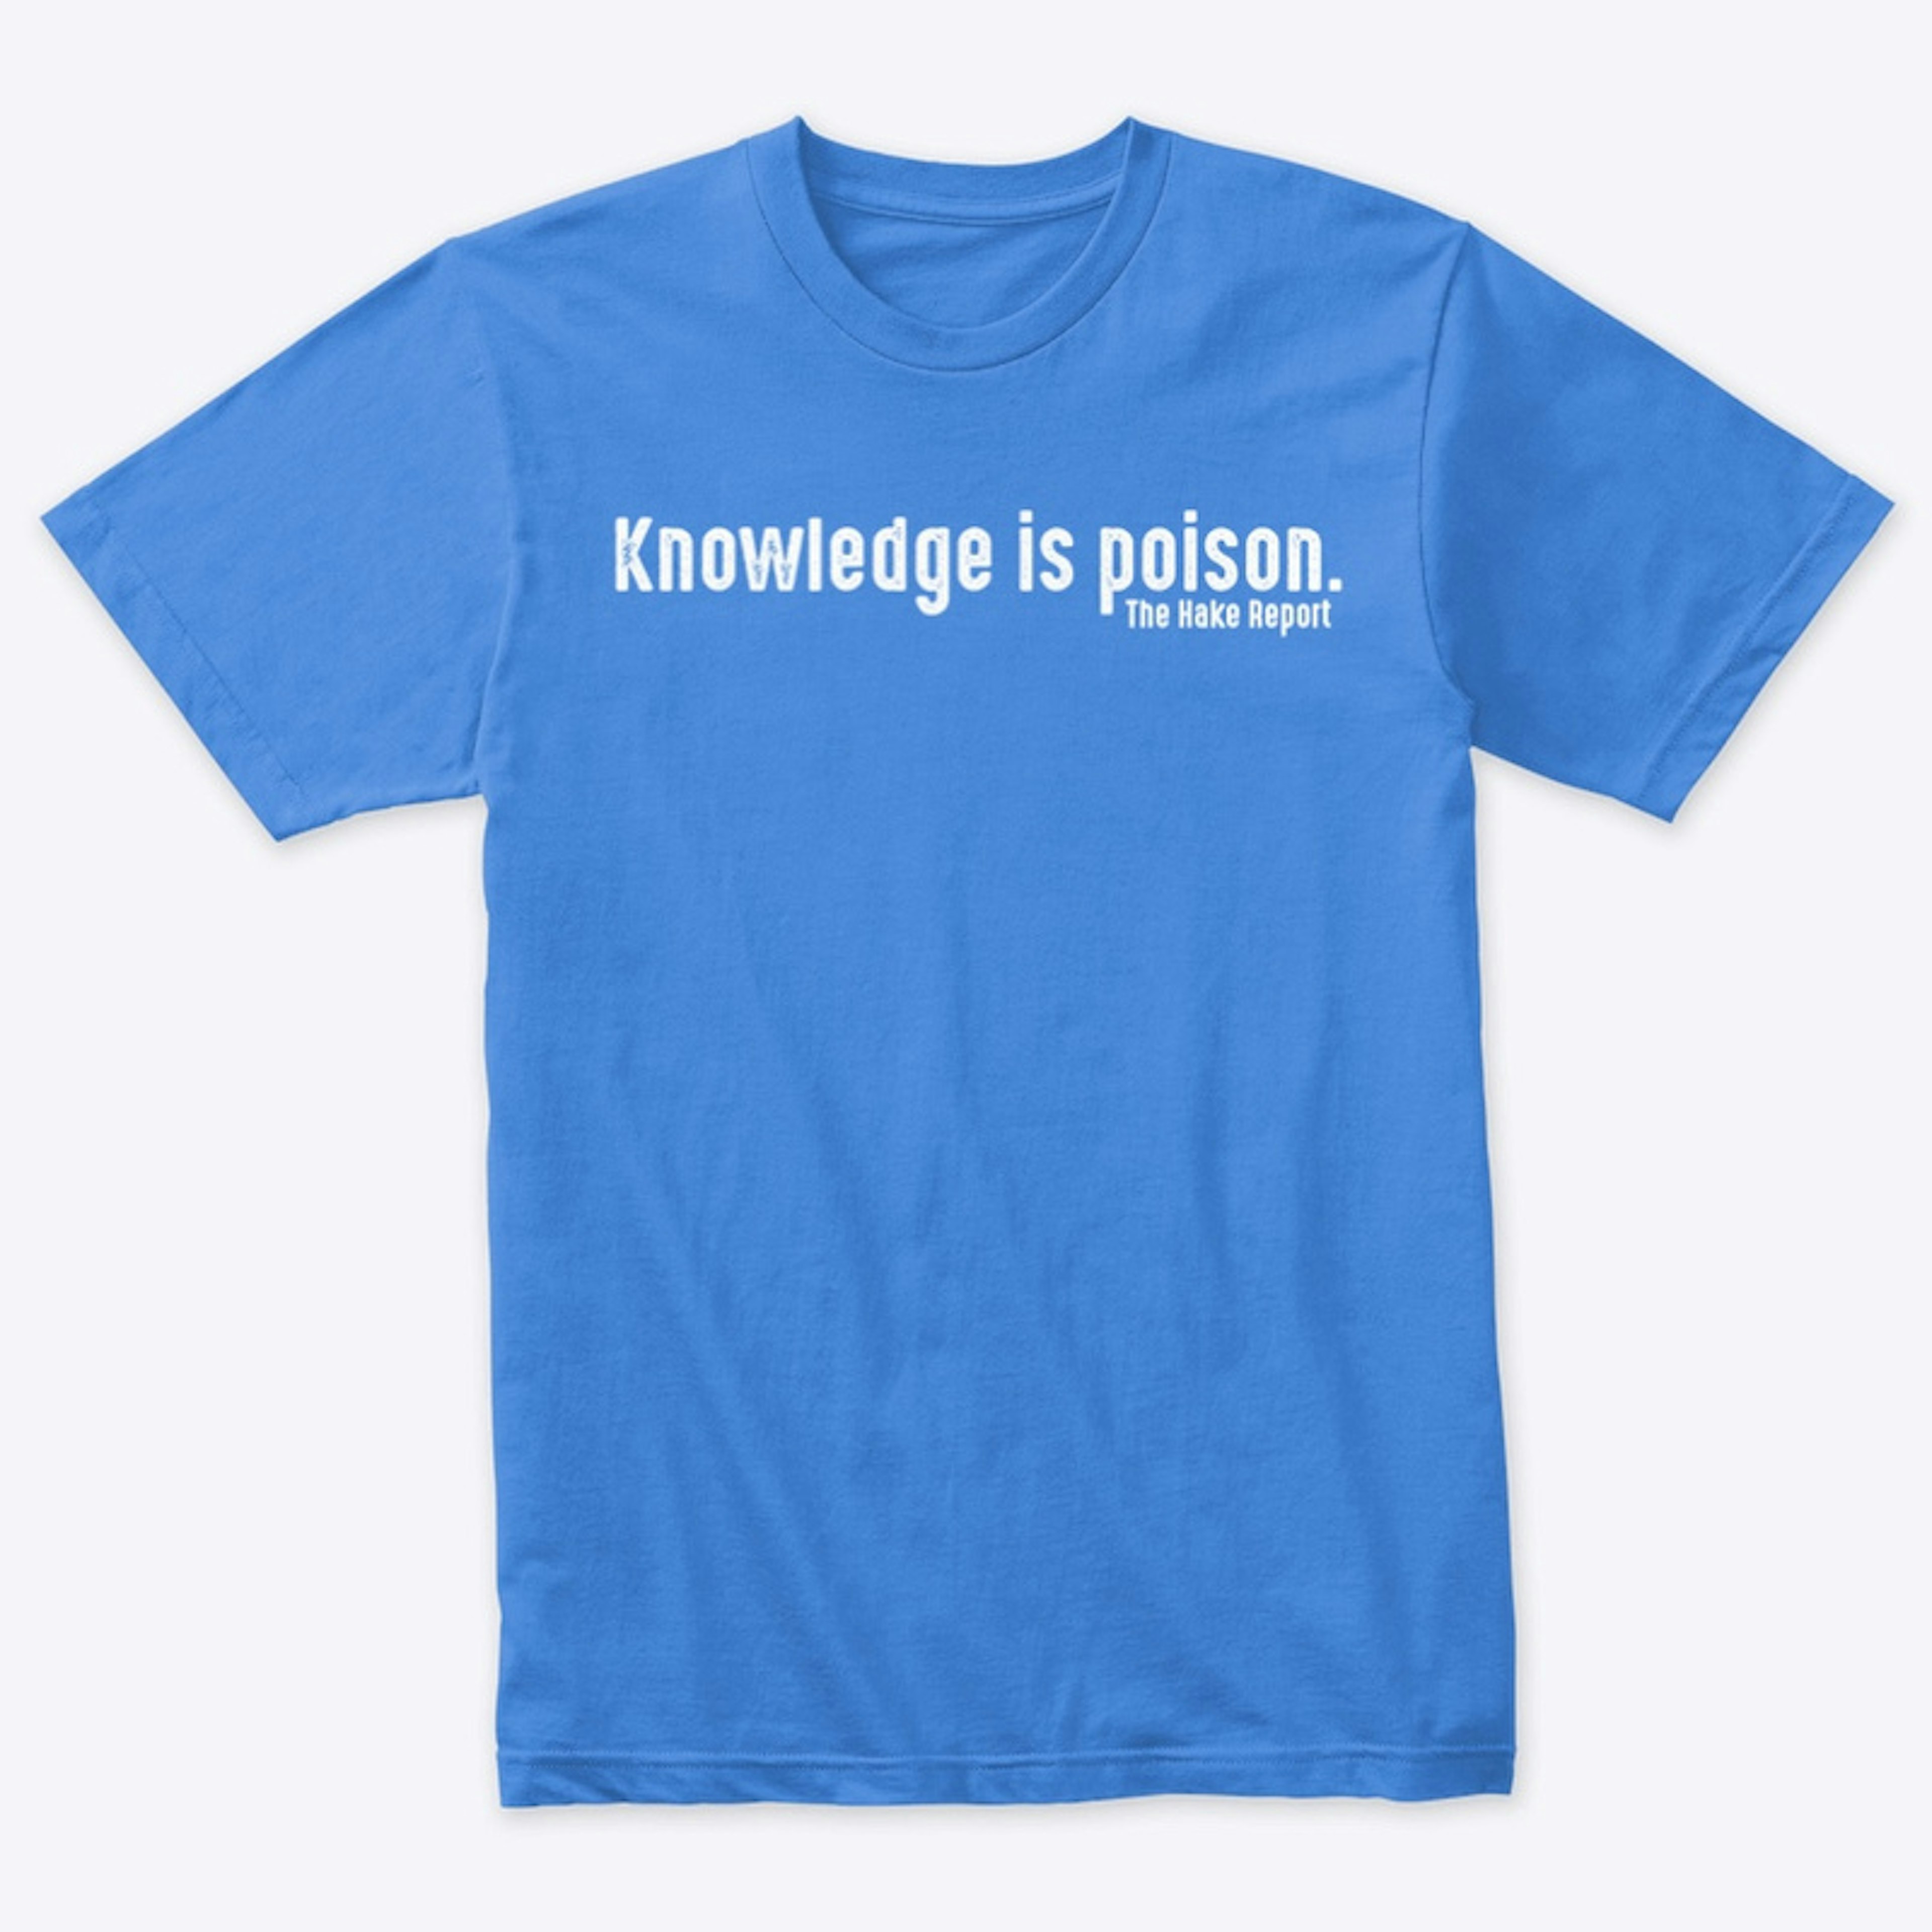 Knowledge is poison (white ink)